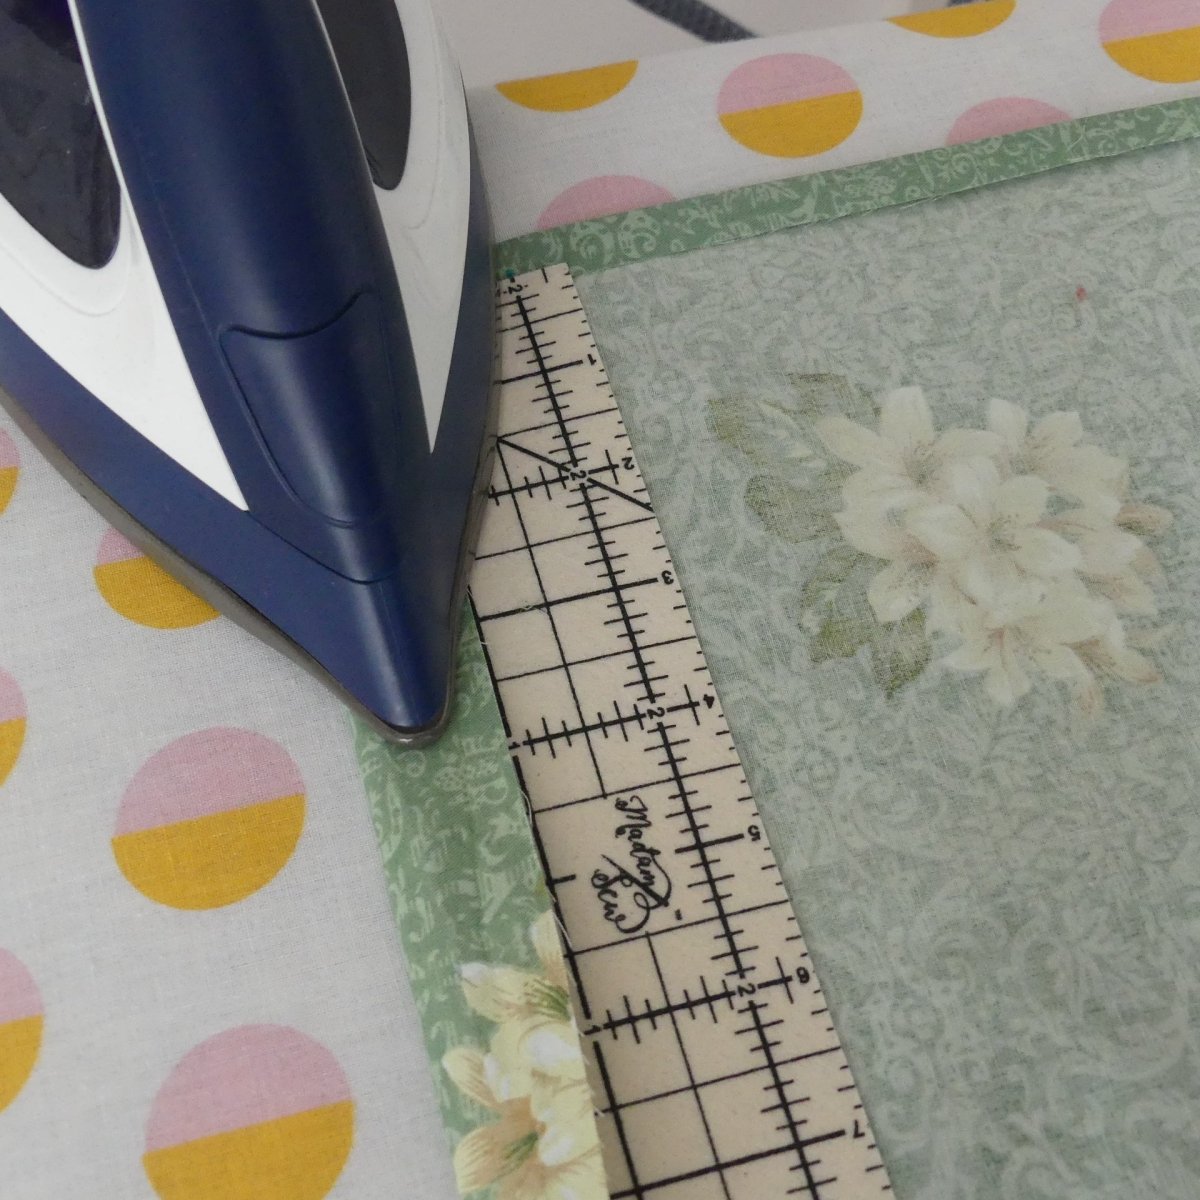 Madam Sew Hot Hem Ruler for Quilting and Sewing – Non-Slip Ironing